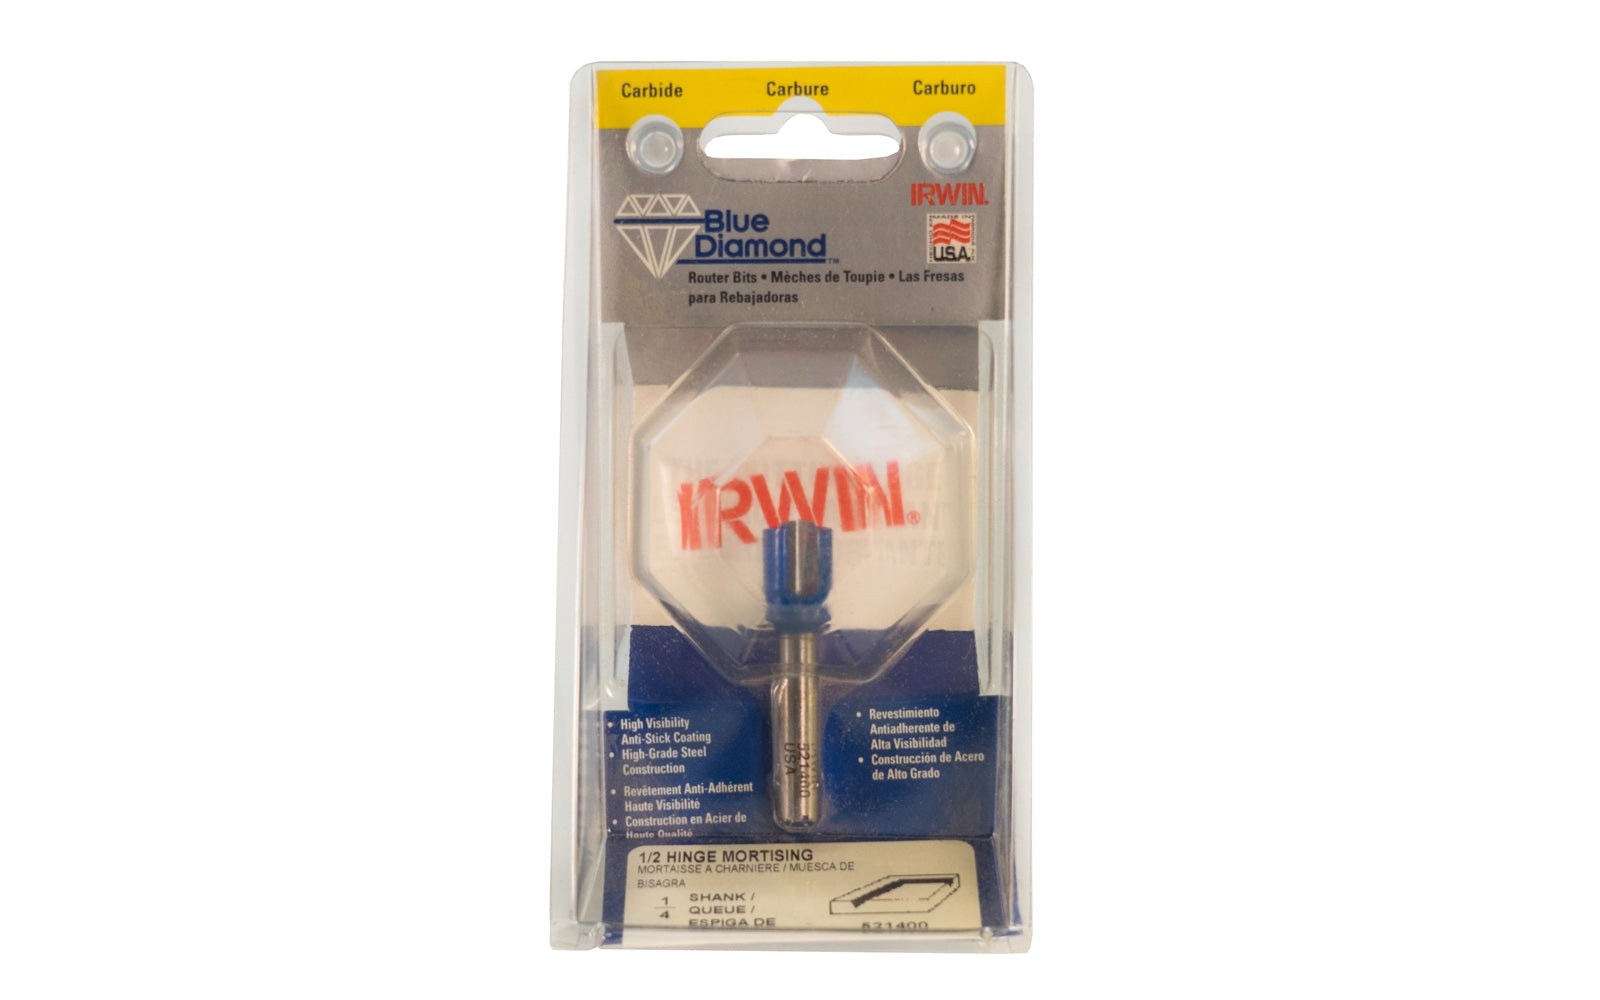 Irwin Carbide 1/2" Hinge Mortising Router Bit - Made in USA. High grade Steel construction Router Bit. 2" overall length. 1/4" shank. Irwin Blue Diamond Model No. 521400. Made in USA.